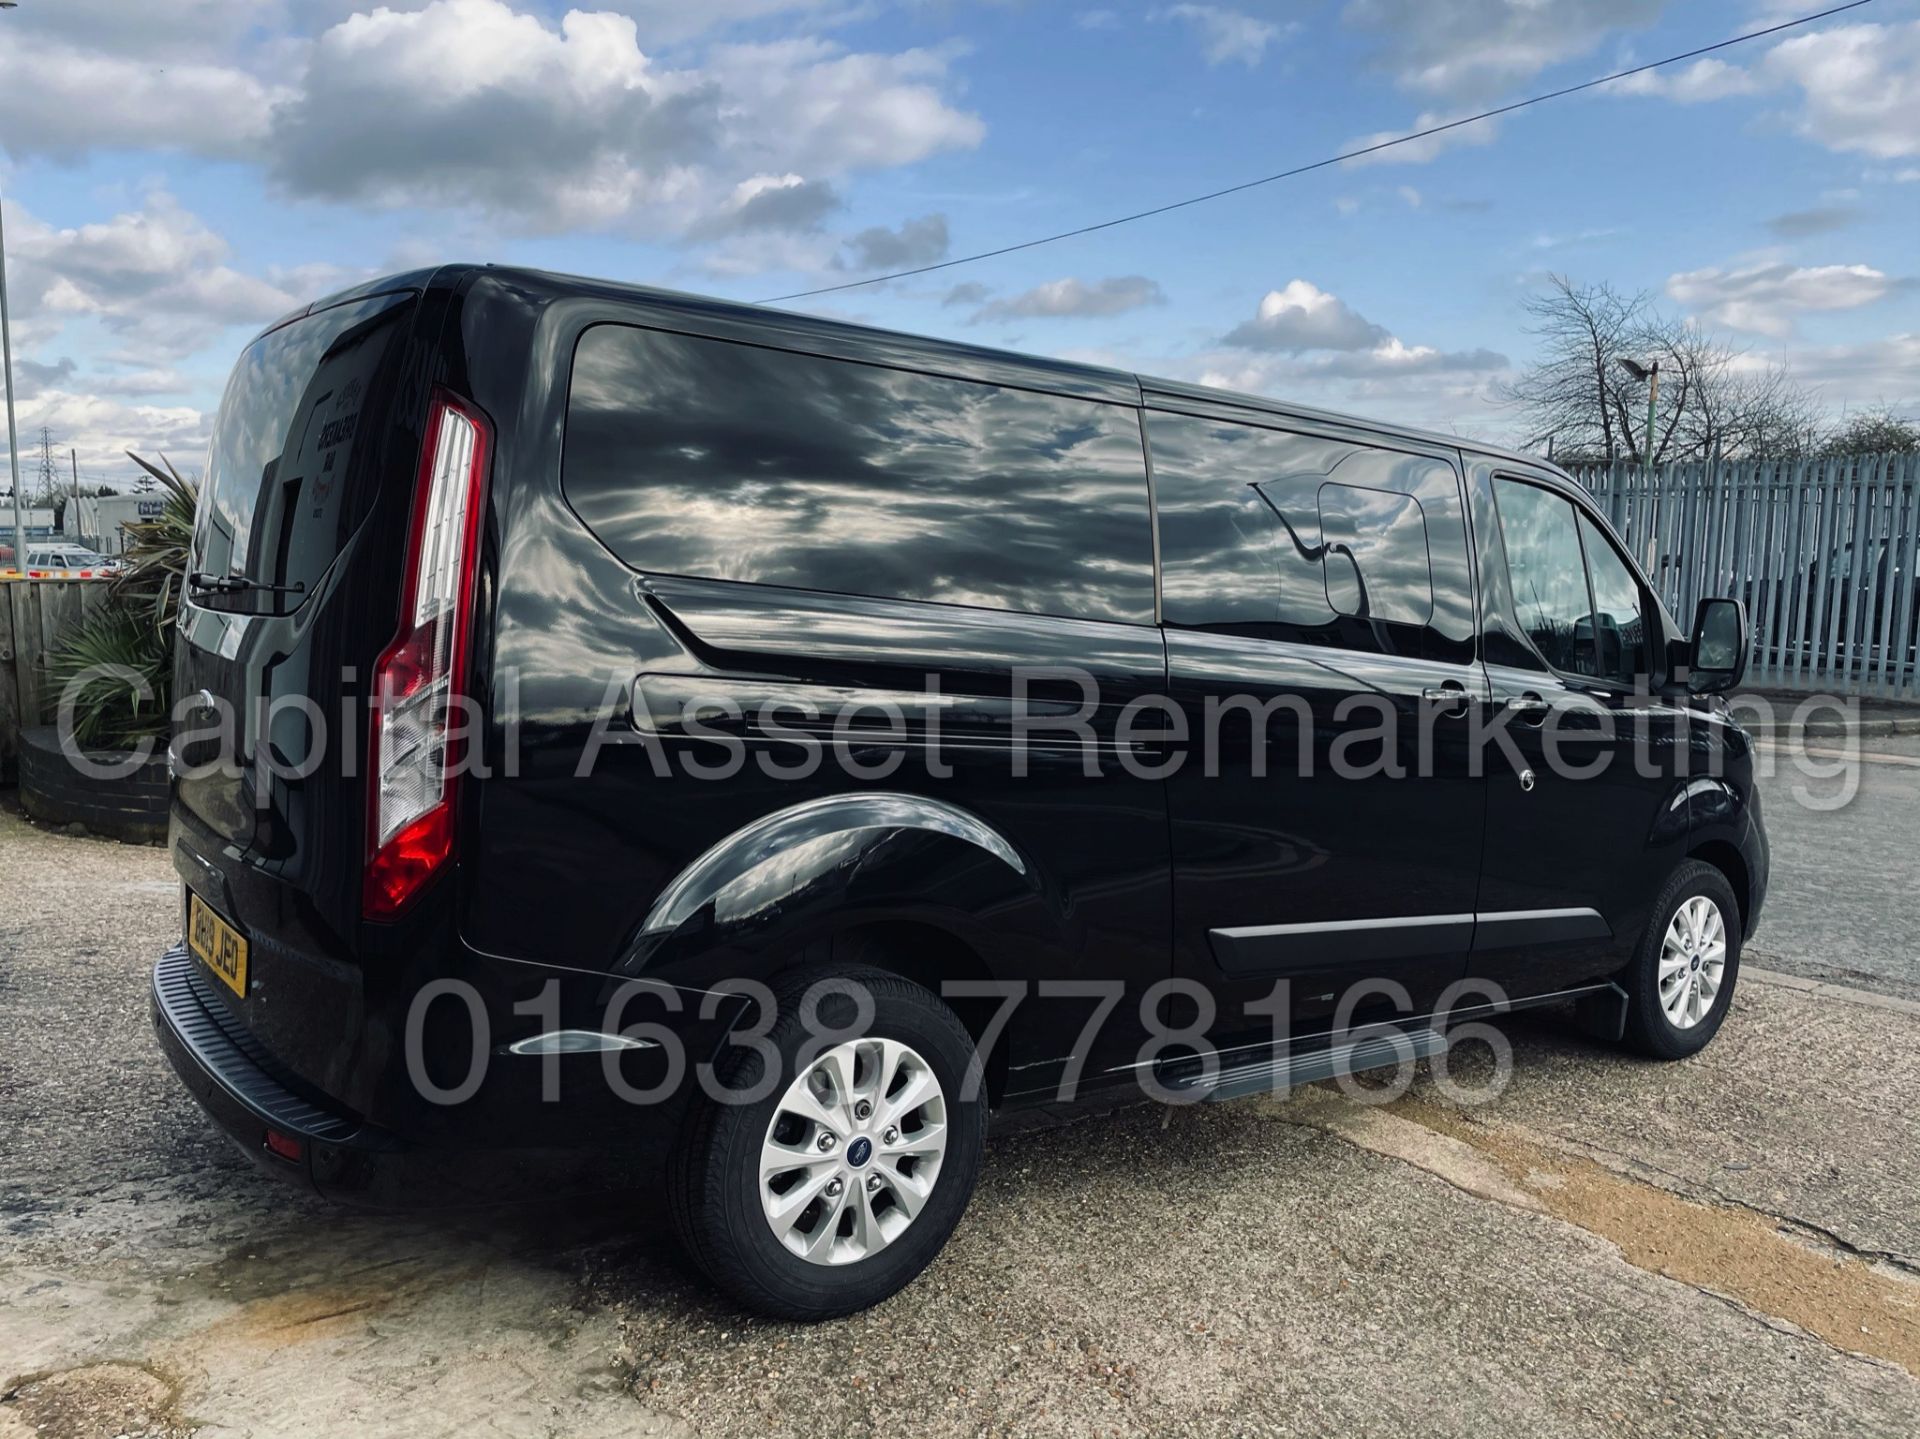 (On Sale) FORD TRANSIT CUSTOM TOURNEO *9 SEATER MPV / BUS* (2019) '2.0 TDCI - 130 BHP' (1 OWNER) - Image 8 of 46